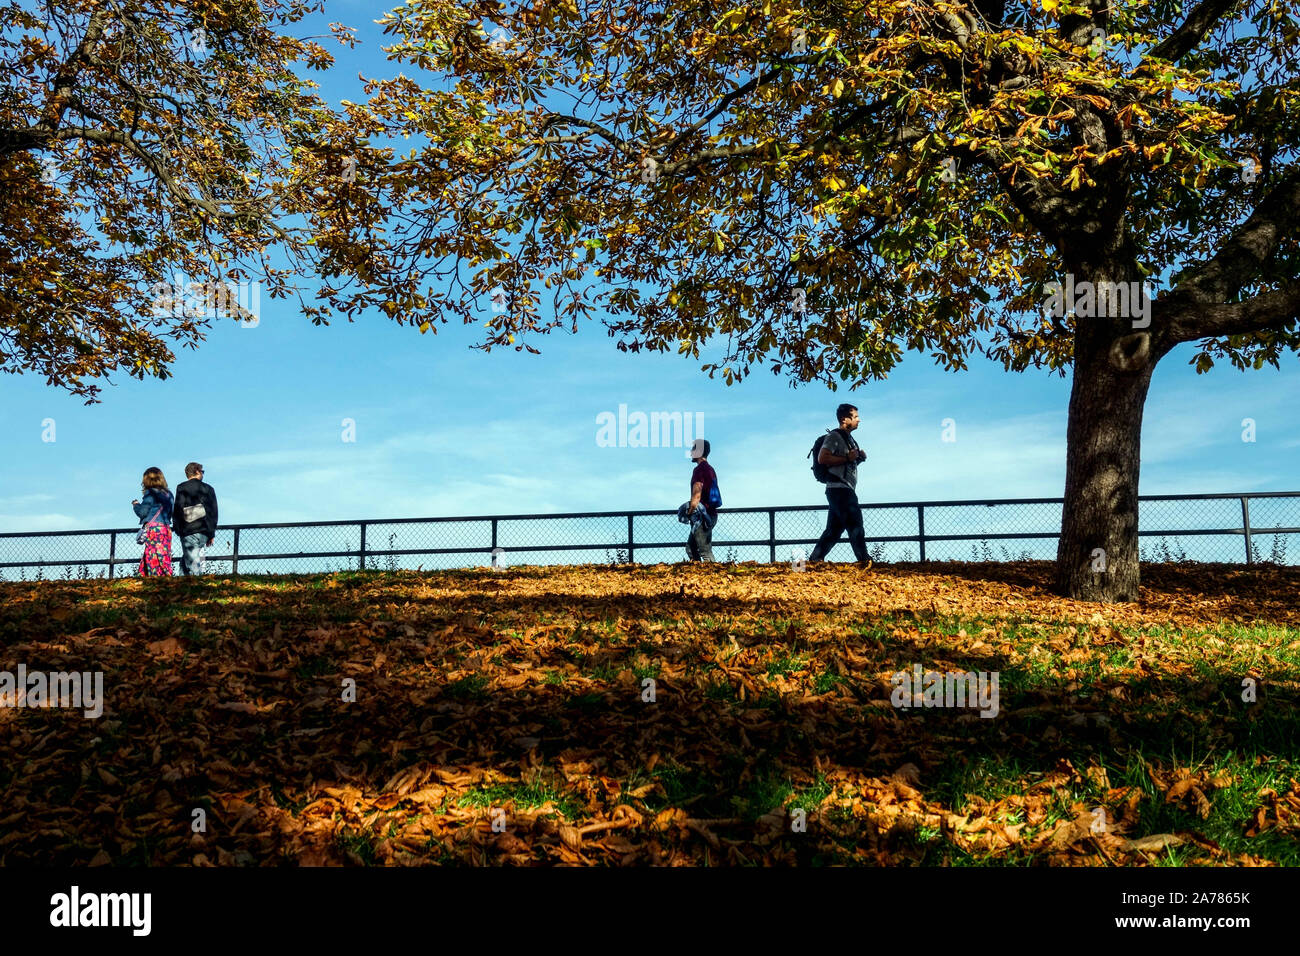 People Walking in Warm Autumn Season City Park, Walk Under Horse chestnut Autumn colours Leaves Nice Weather autumnal trees on a sunny day Strolling Stock Photo